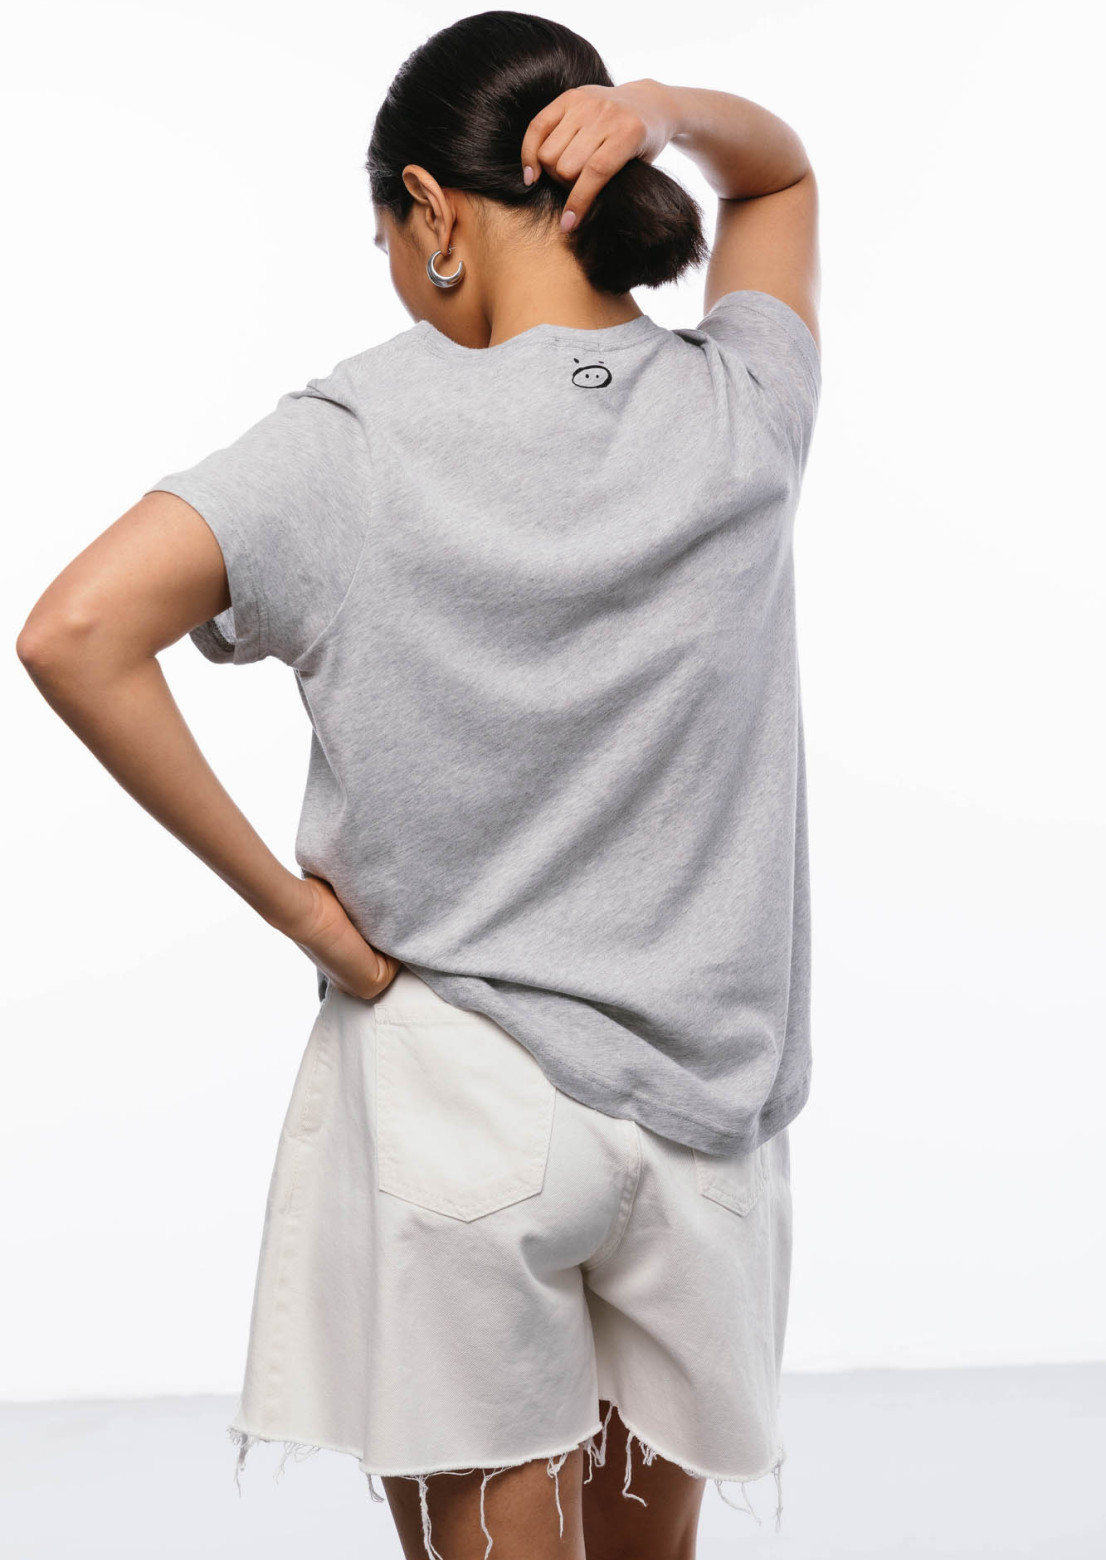 Grey melange basic t-shirt with a round bottom made of jersey